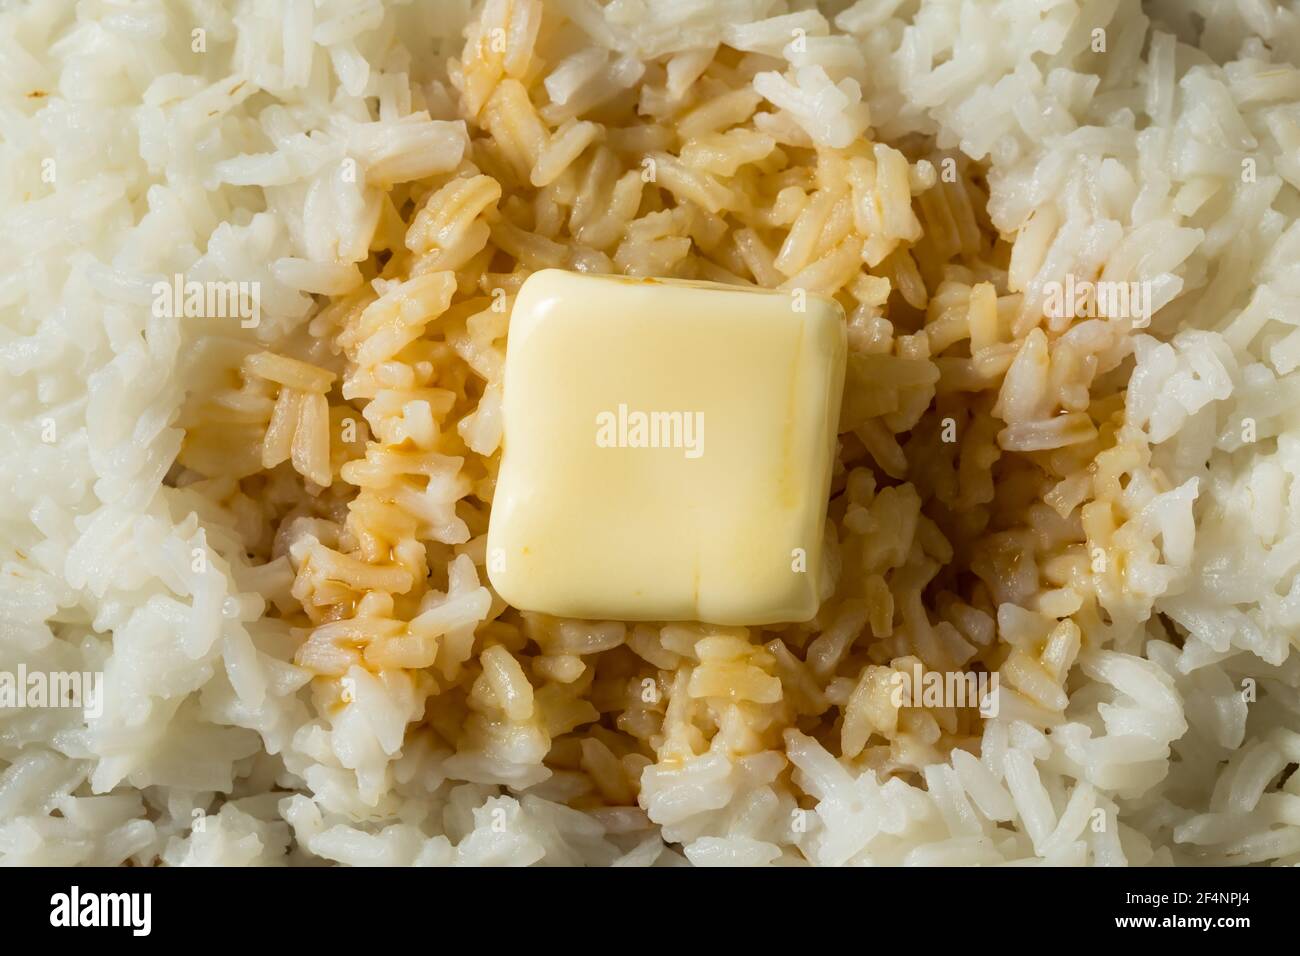 Homemade Japanese Butter Rice with Soy Sauce Stock Photo